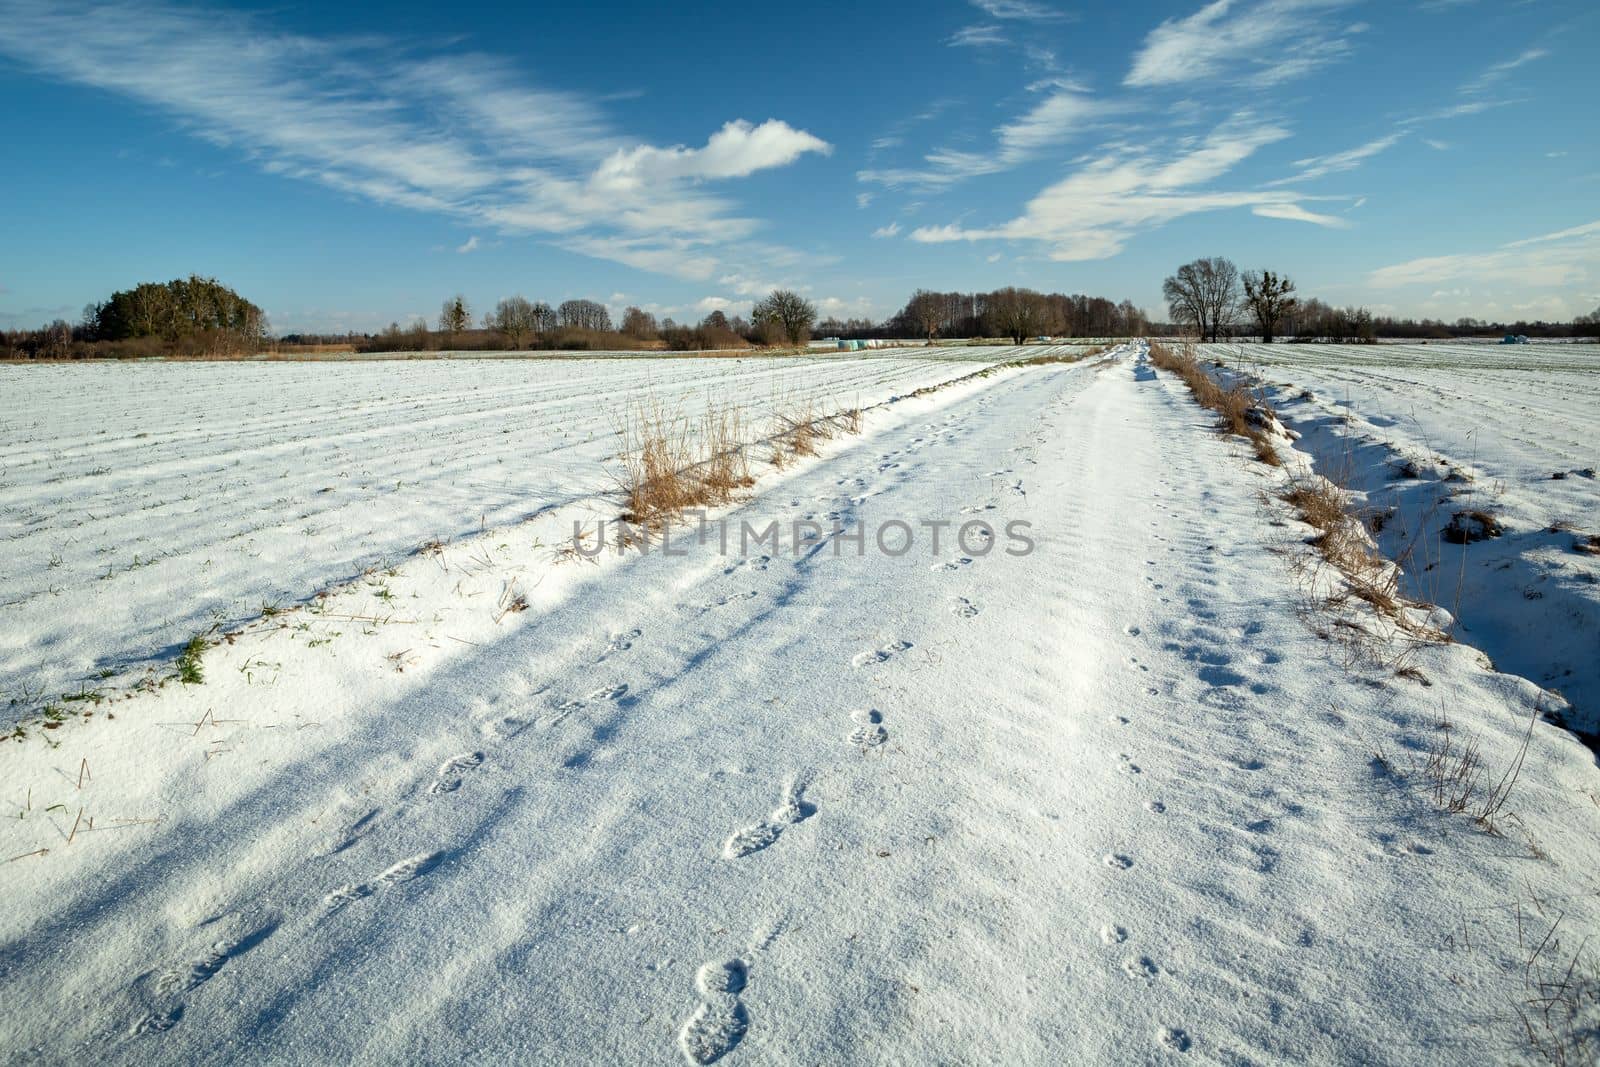 Footprints on a snow-covered road between fields, winter sunny day